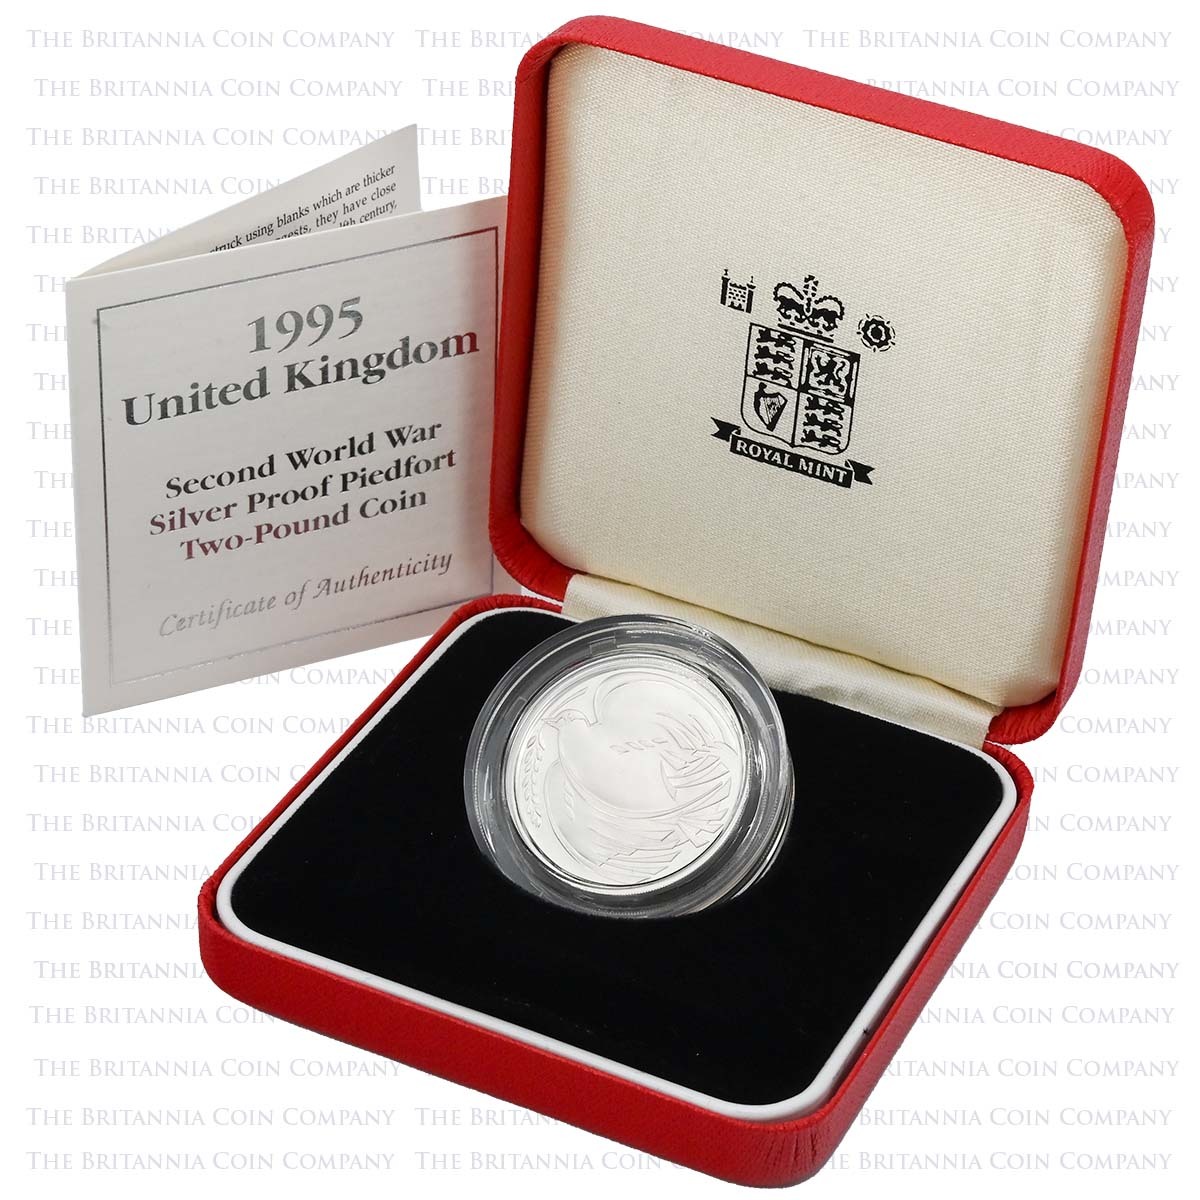 1995 Dove Of Peace End Of The Second World War Two Pound Piedfort Silver Proof Coin Boxed